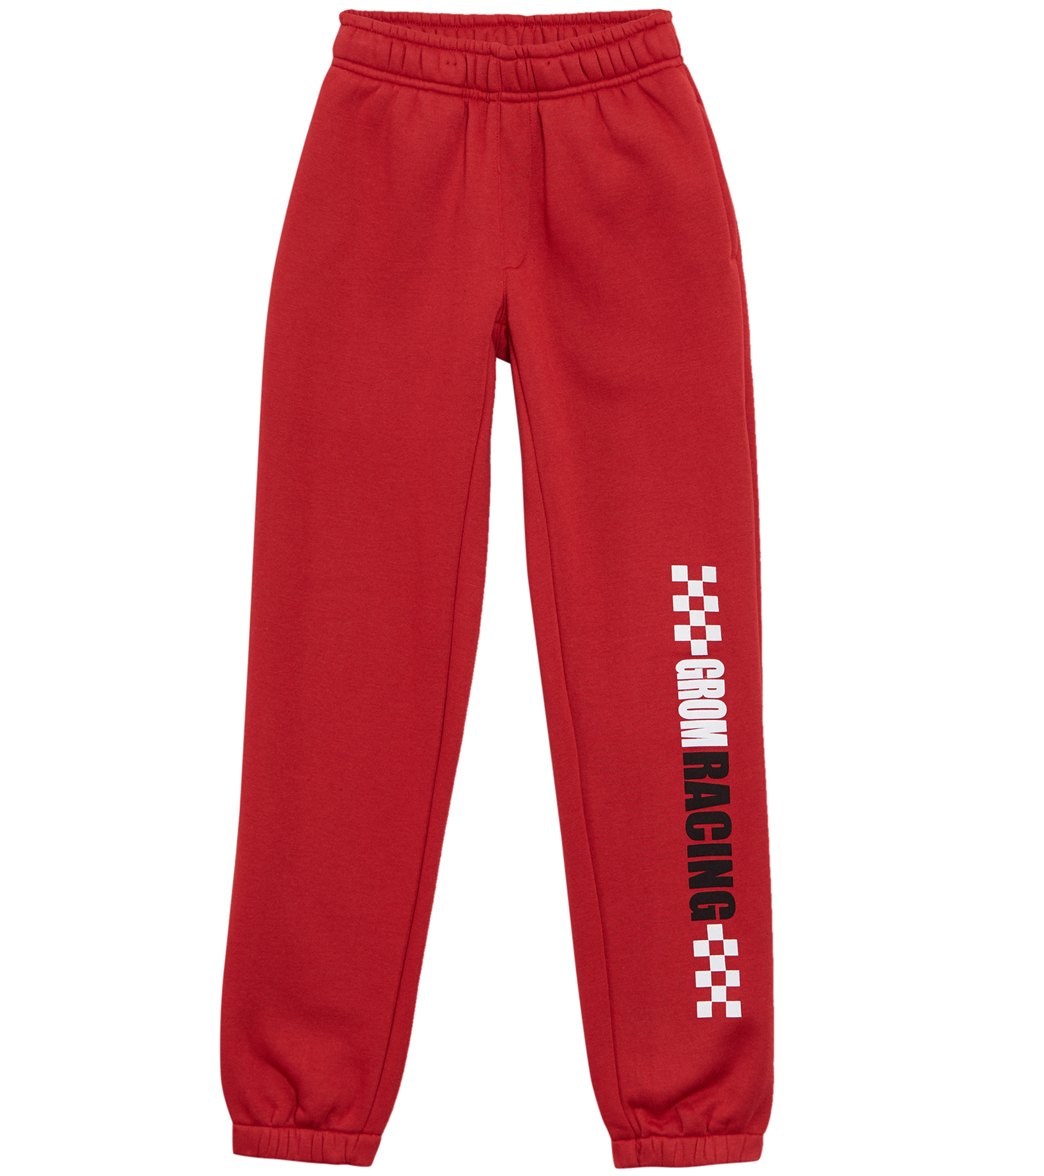 Grom Boys' Heavy Duty Sweatpant - Red Medium 8 Cotton/Polyester - Swimoutlet.com